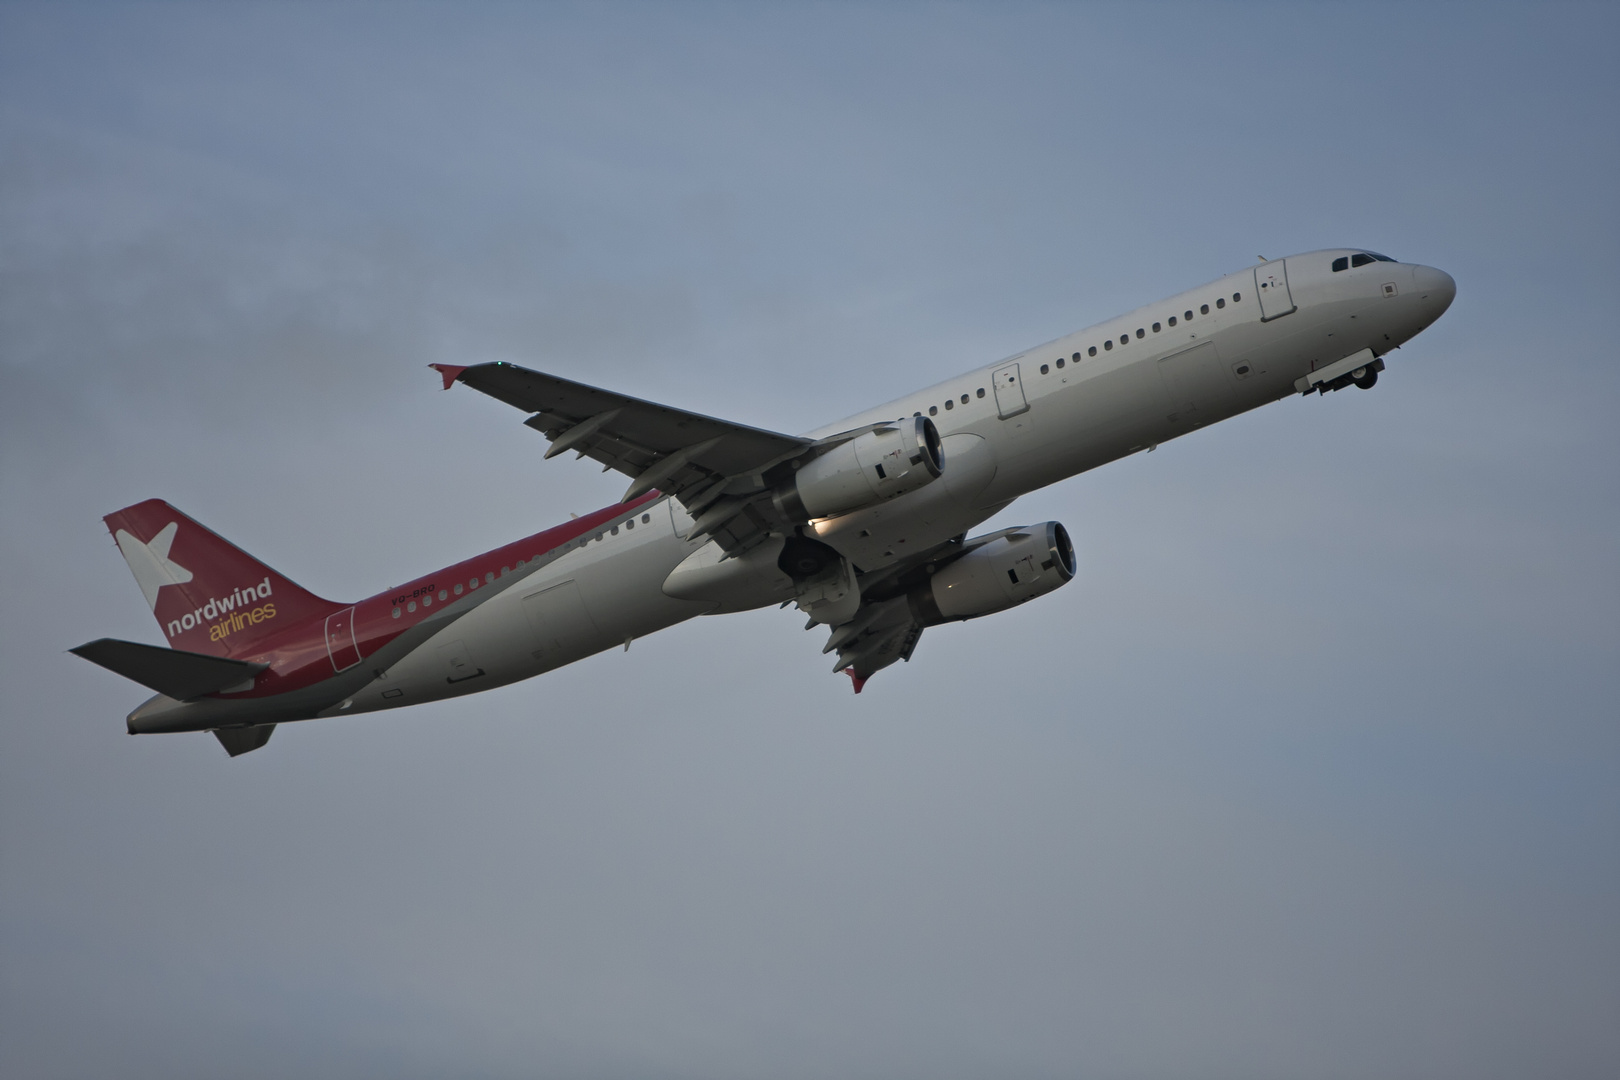 nordwind airlines A321-232...